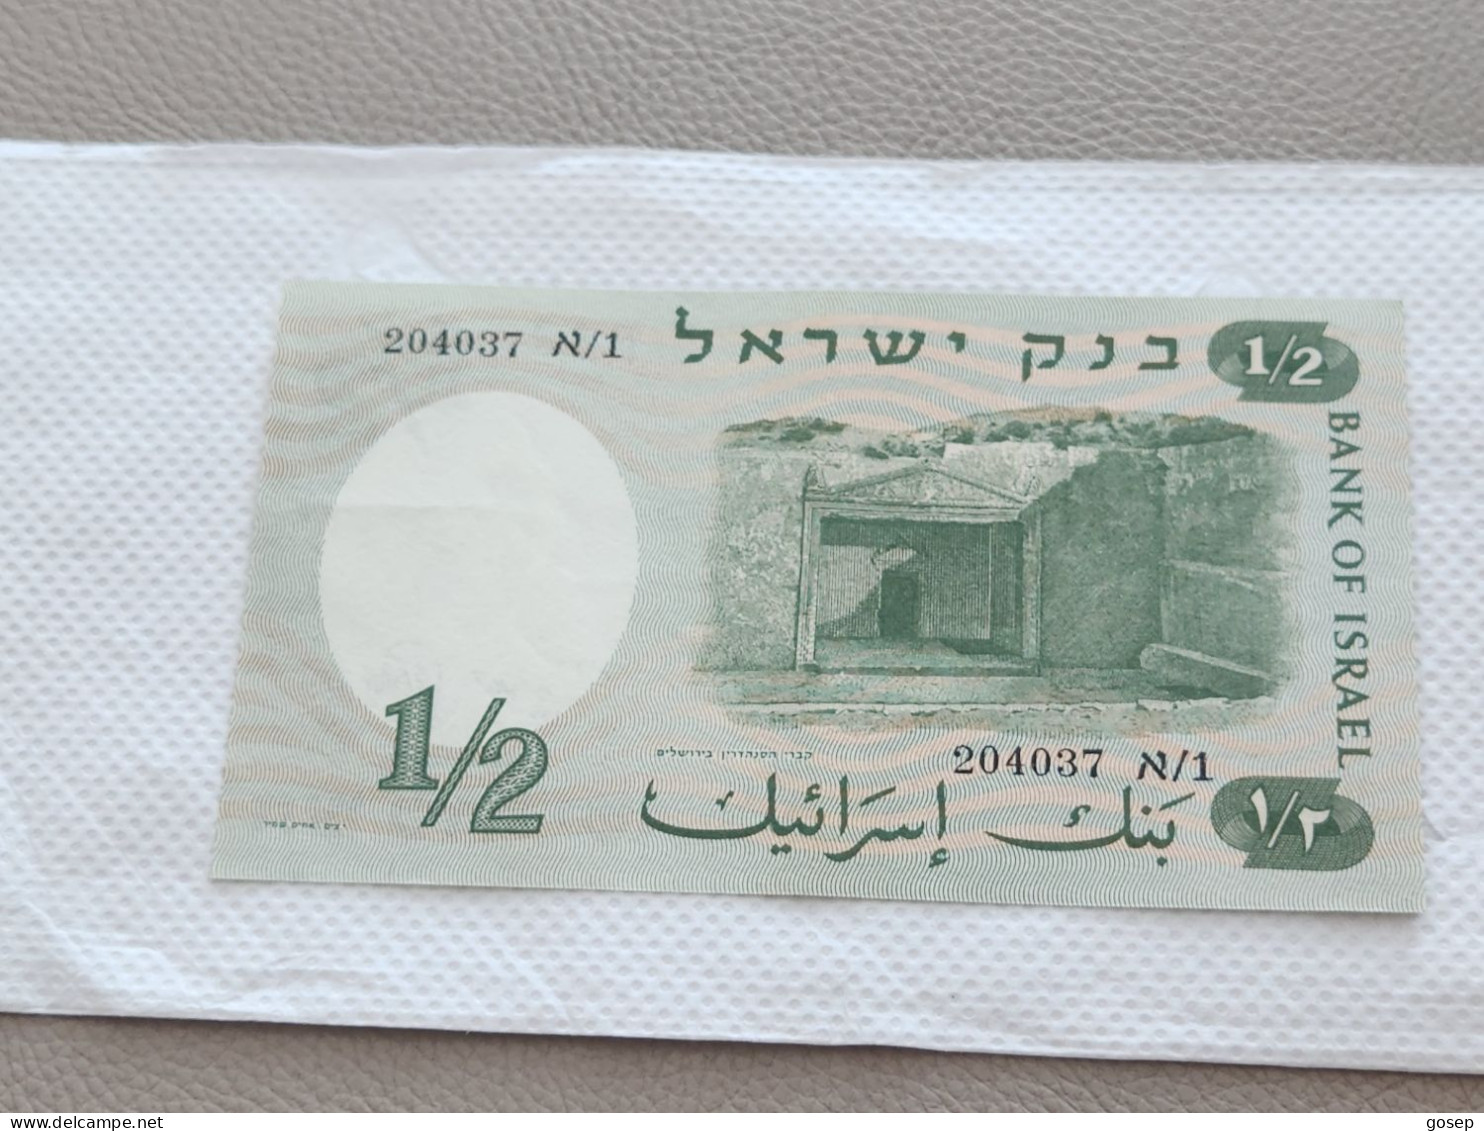 Israel-1/2 LIRA-WOMEN SOLIDER-(1958)-(rite Number From Black)-(59)-(204037-א/1)-XXF-BANK NOTE - Israel